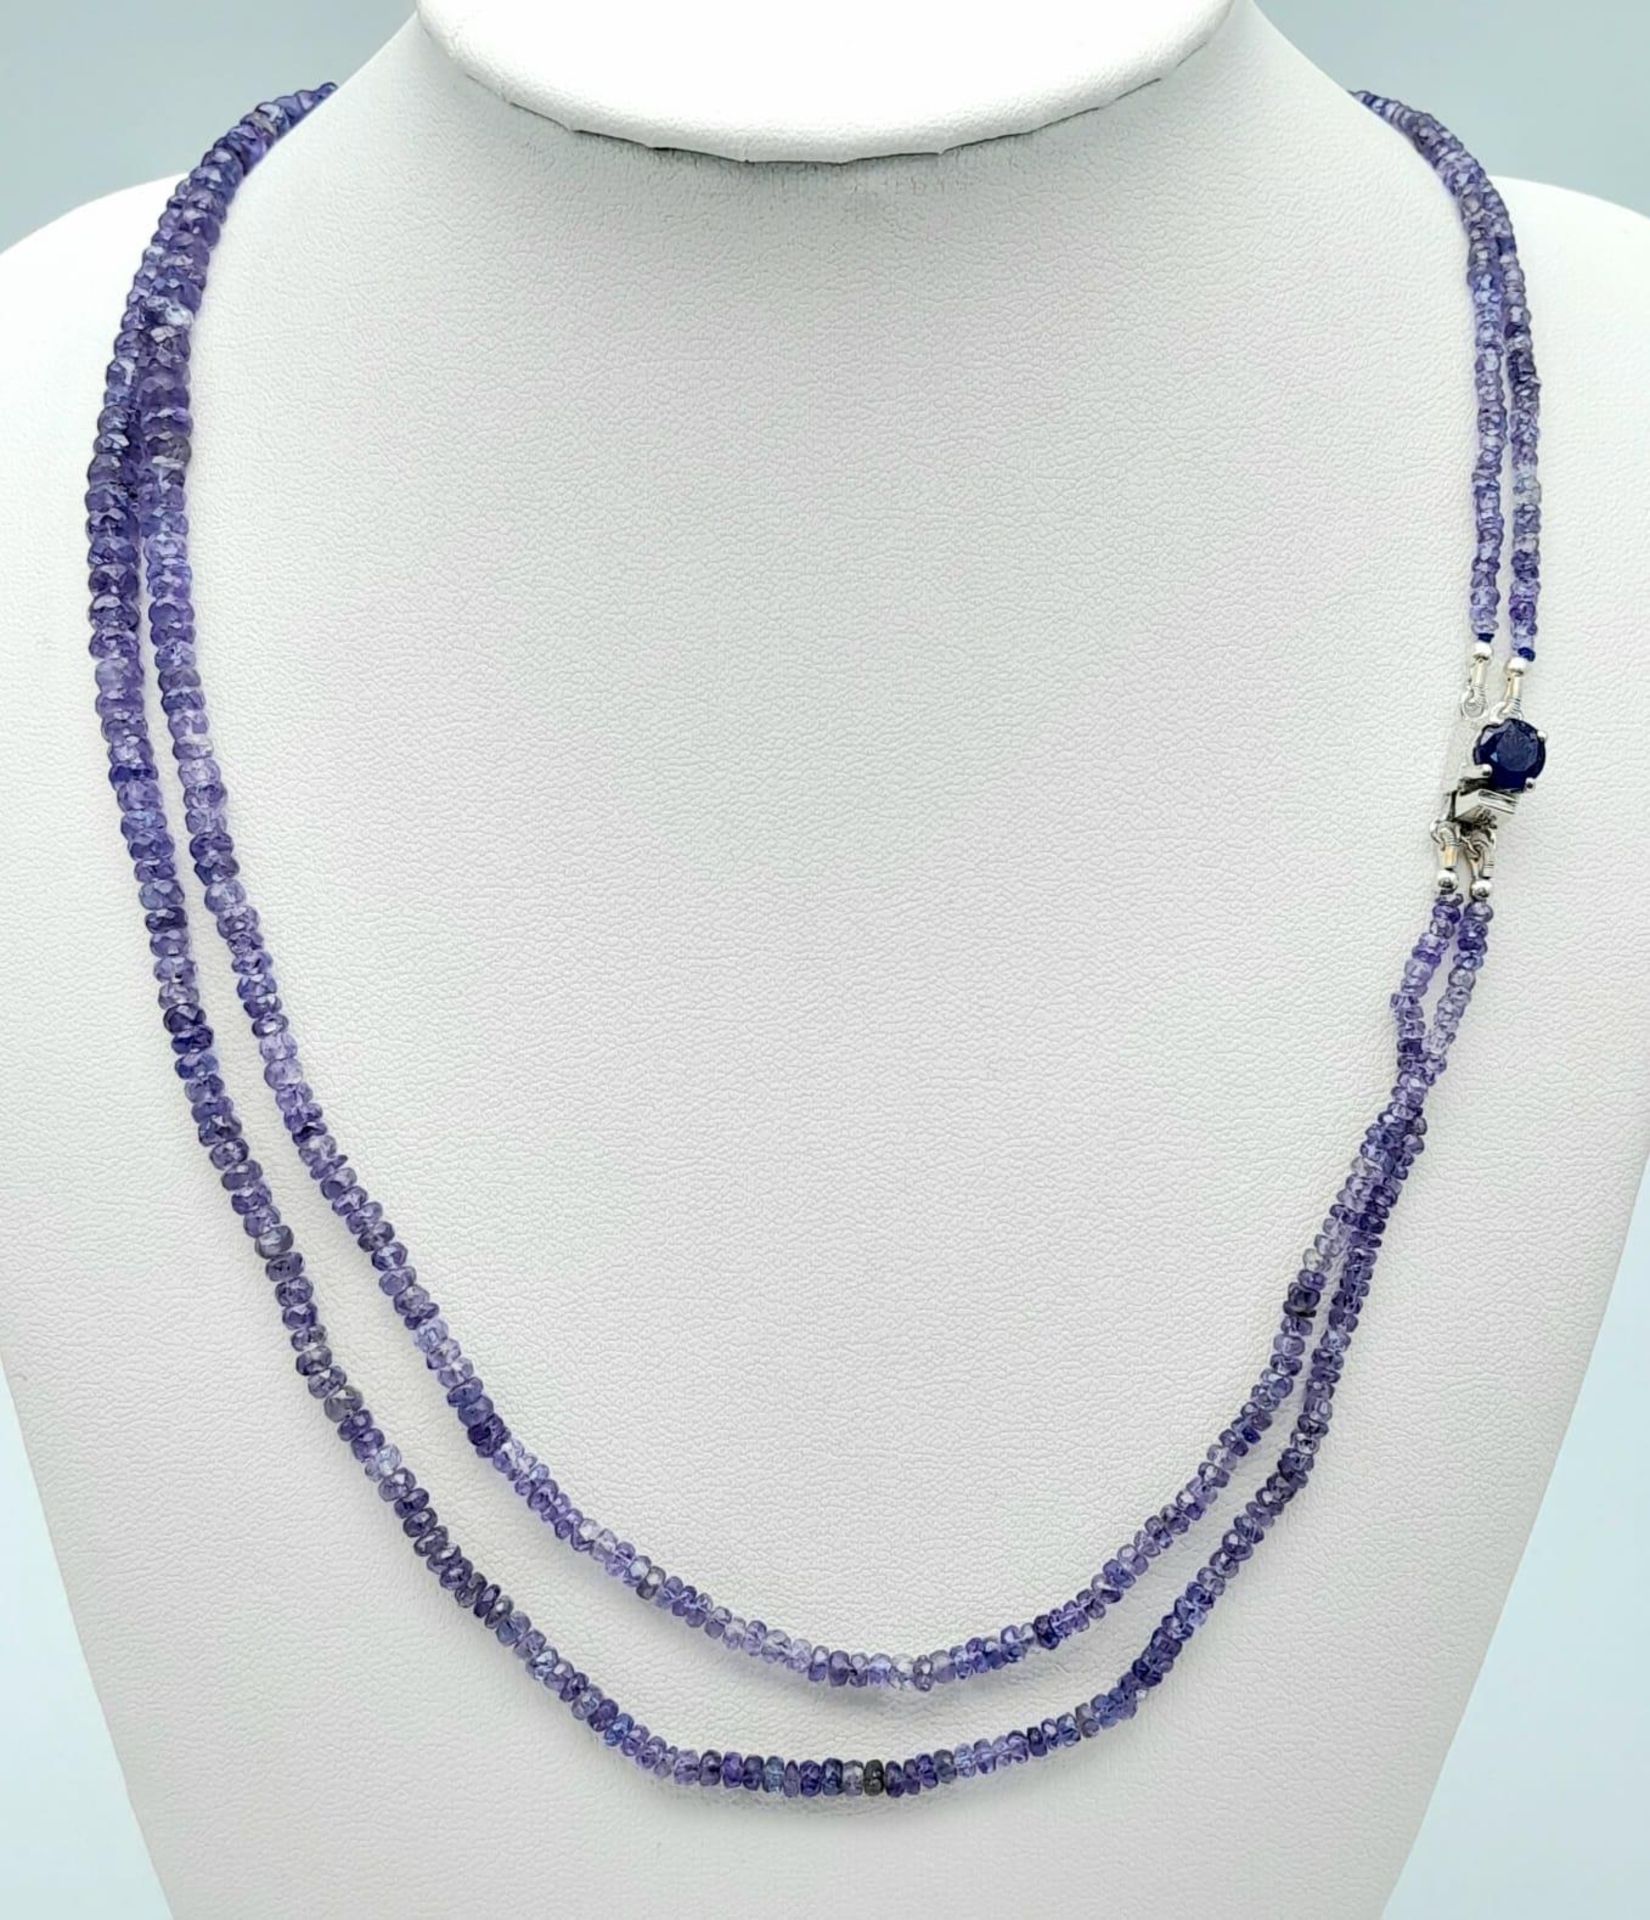 A 100ctw Two Row Tanzanite Necklace with a Sapphire and 925 Silver Clasp. 48cm length, 20.3g total